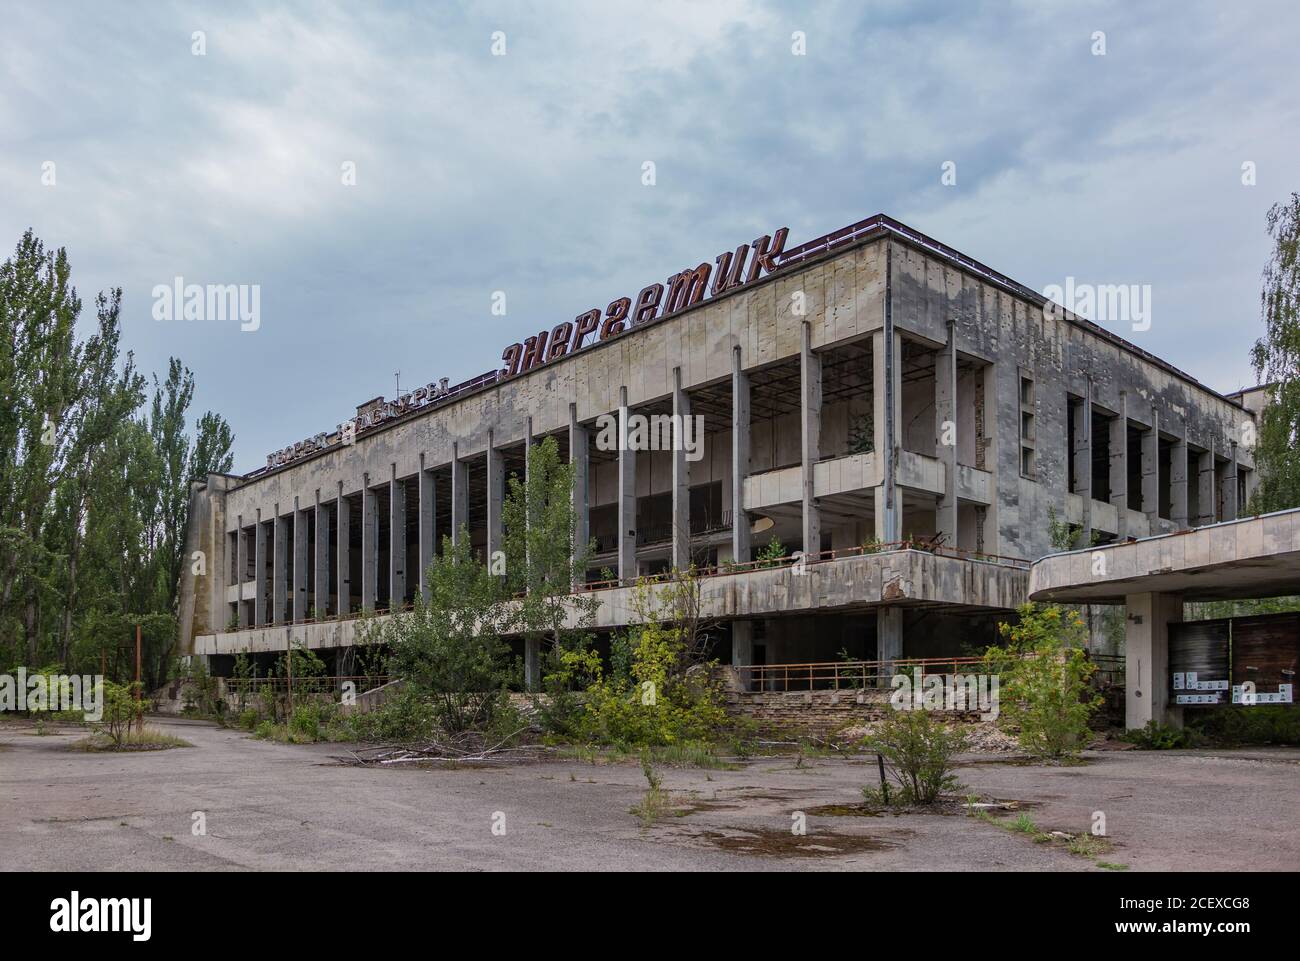 A picture of the abandoned community center / palace of culture of Pripyat. Stock Photo